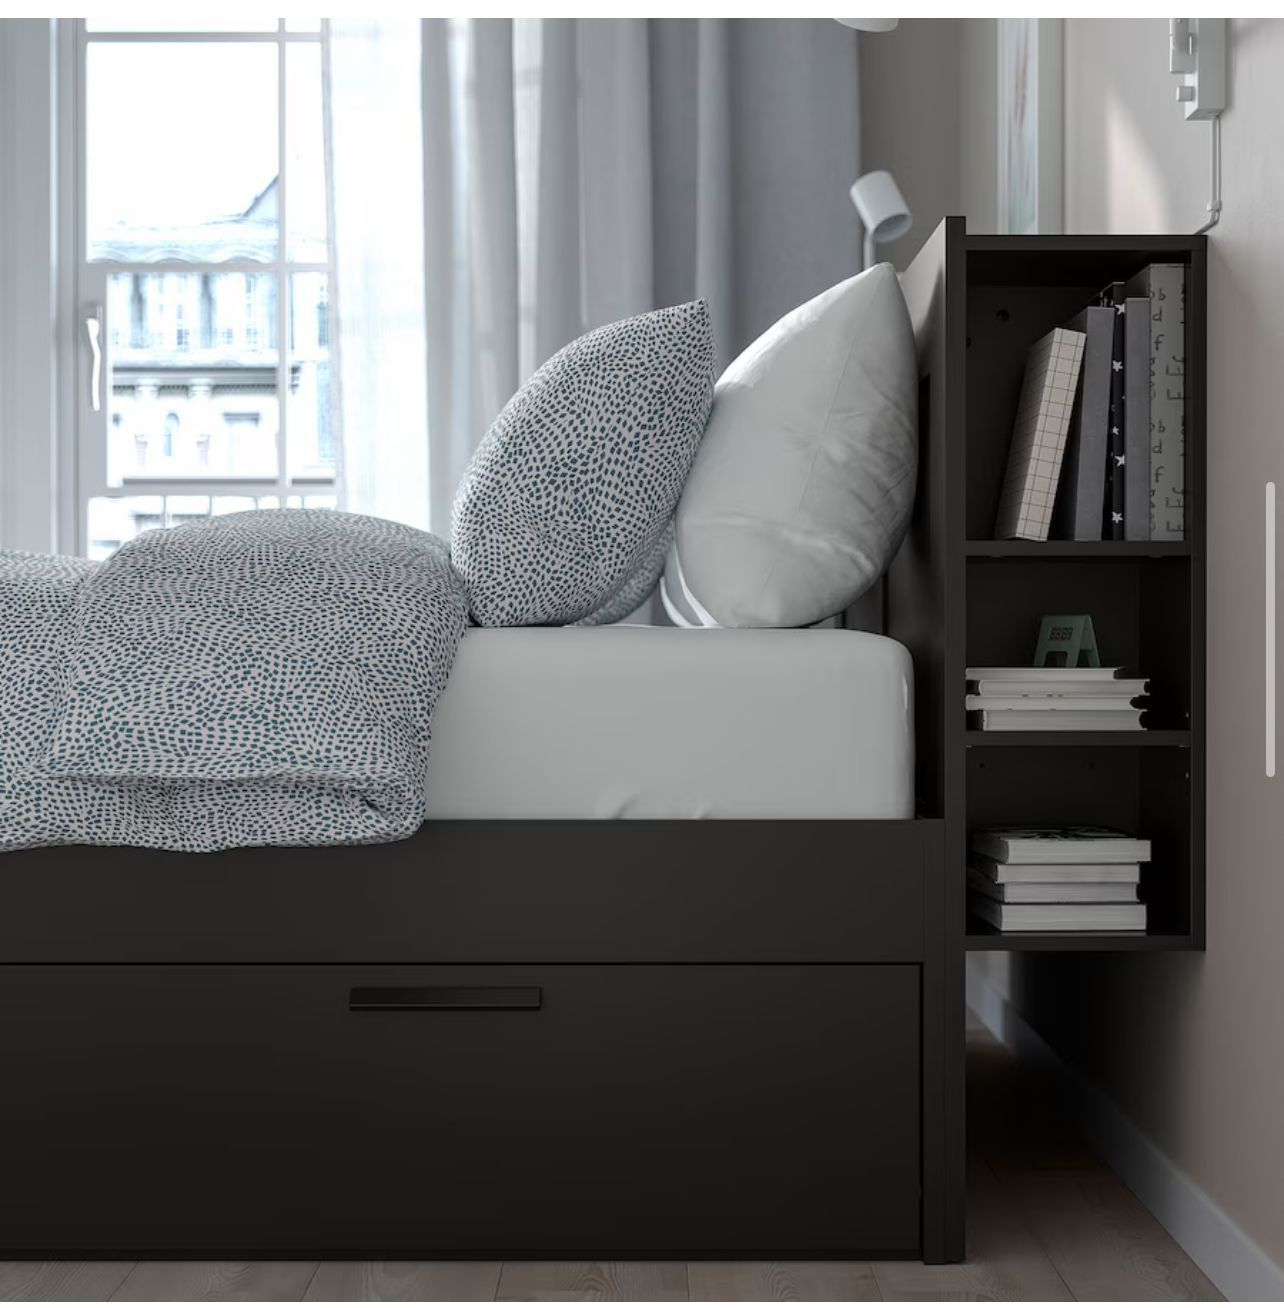 bed from IKEA